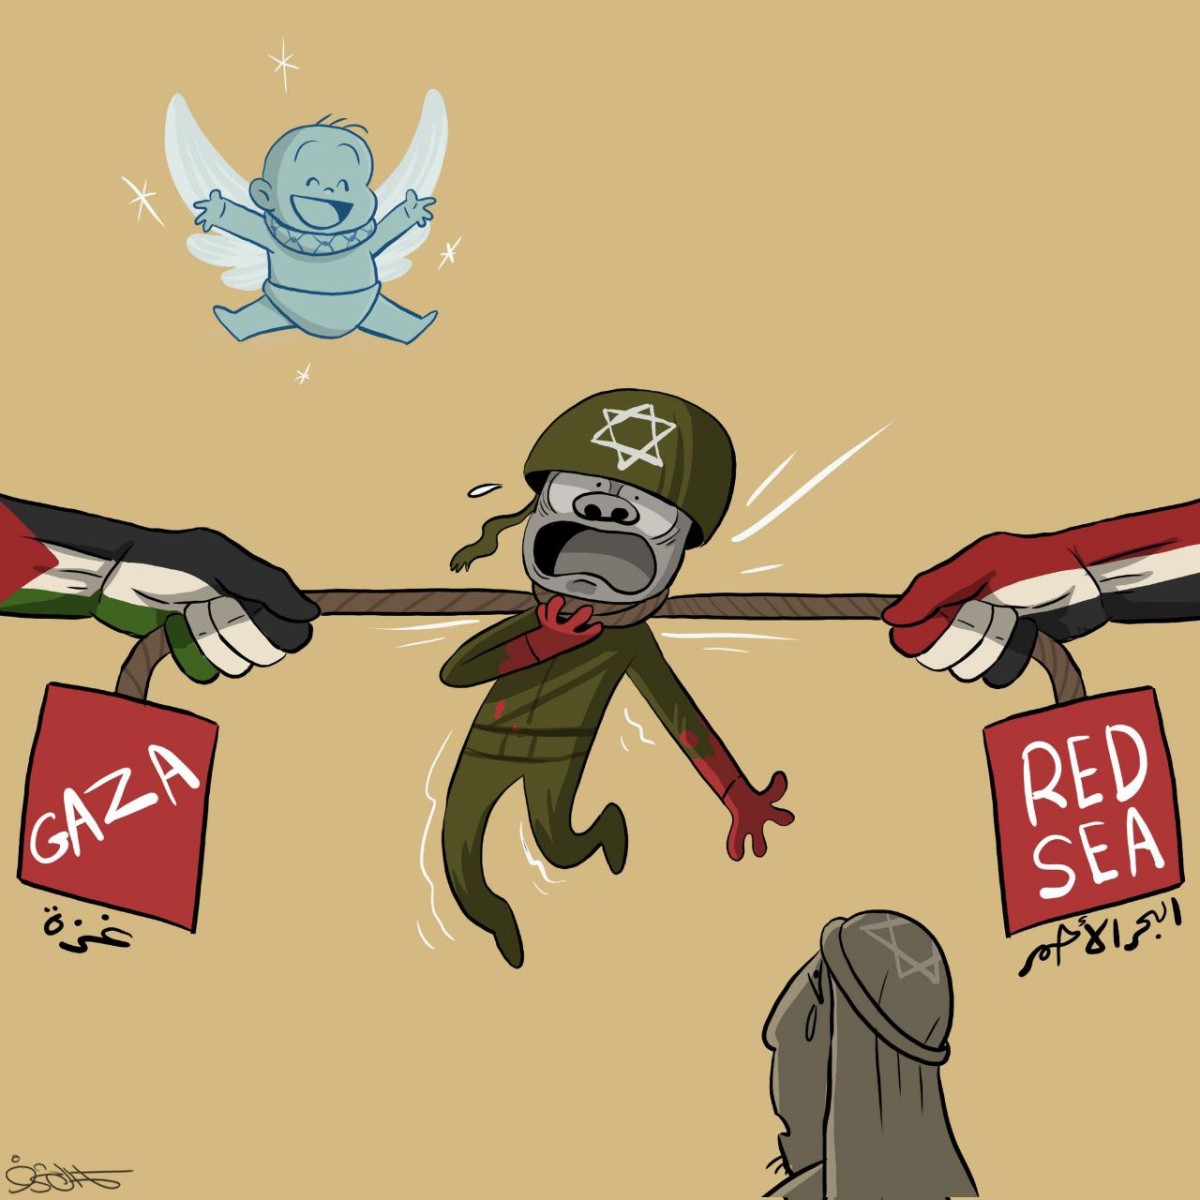 The unity of Yemen and Palestine against Israel